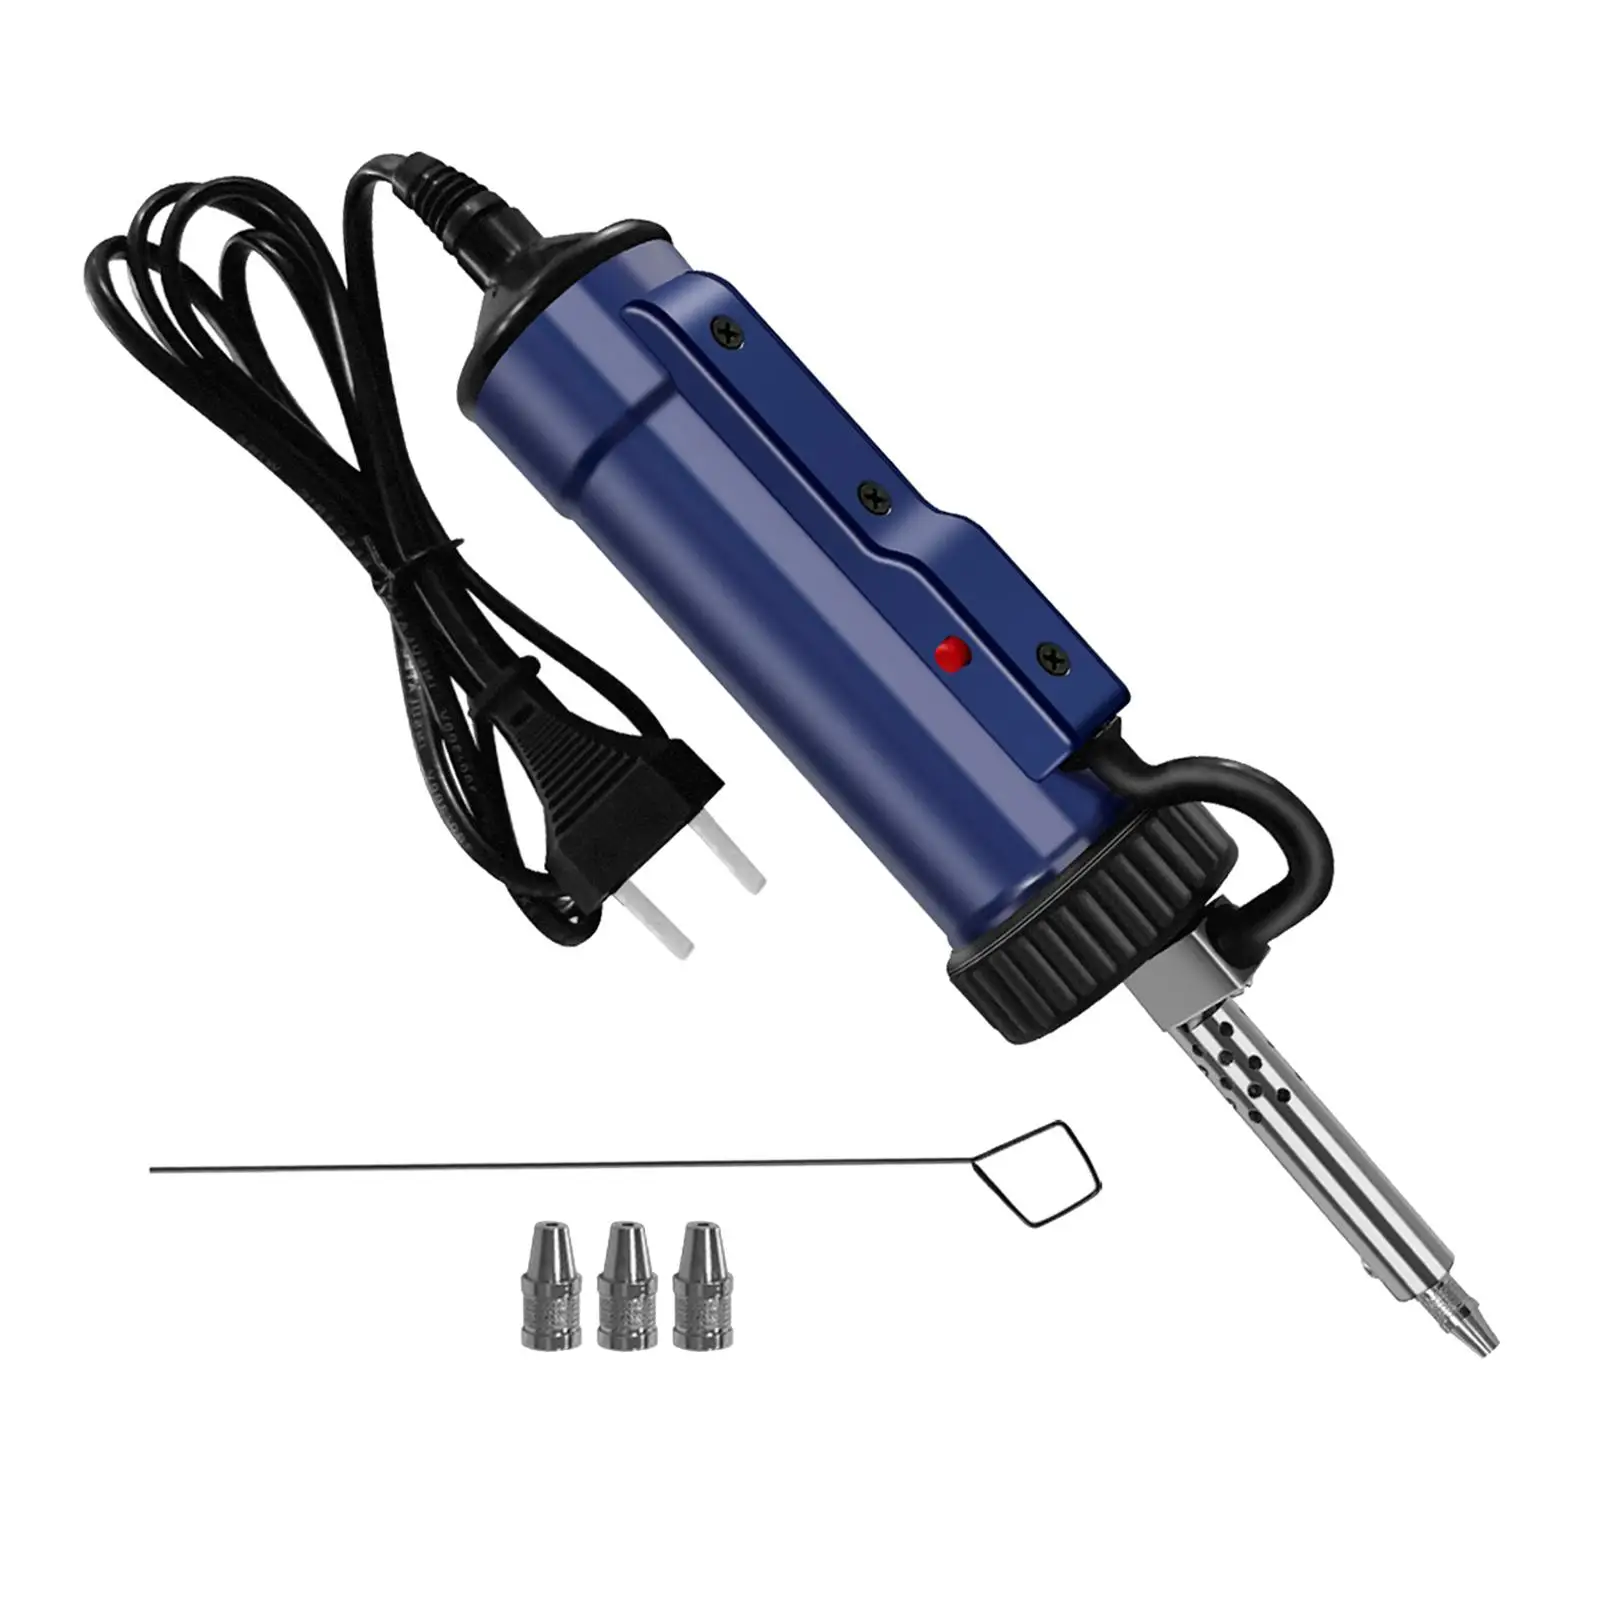 Electric Solder Tin suckers 30W Electric DIY Welding Soldering Automatic Handheld Solder Iron Kits for Home DIY Hobby Industry